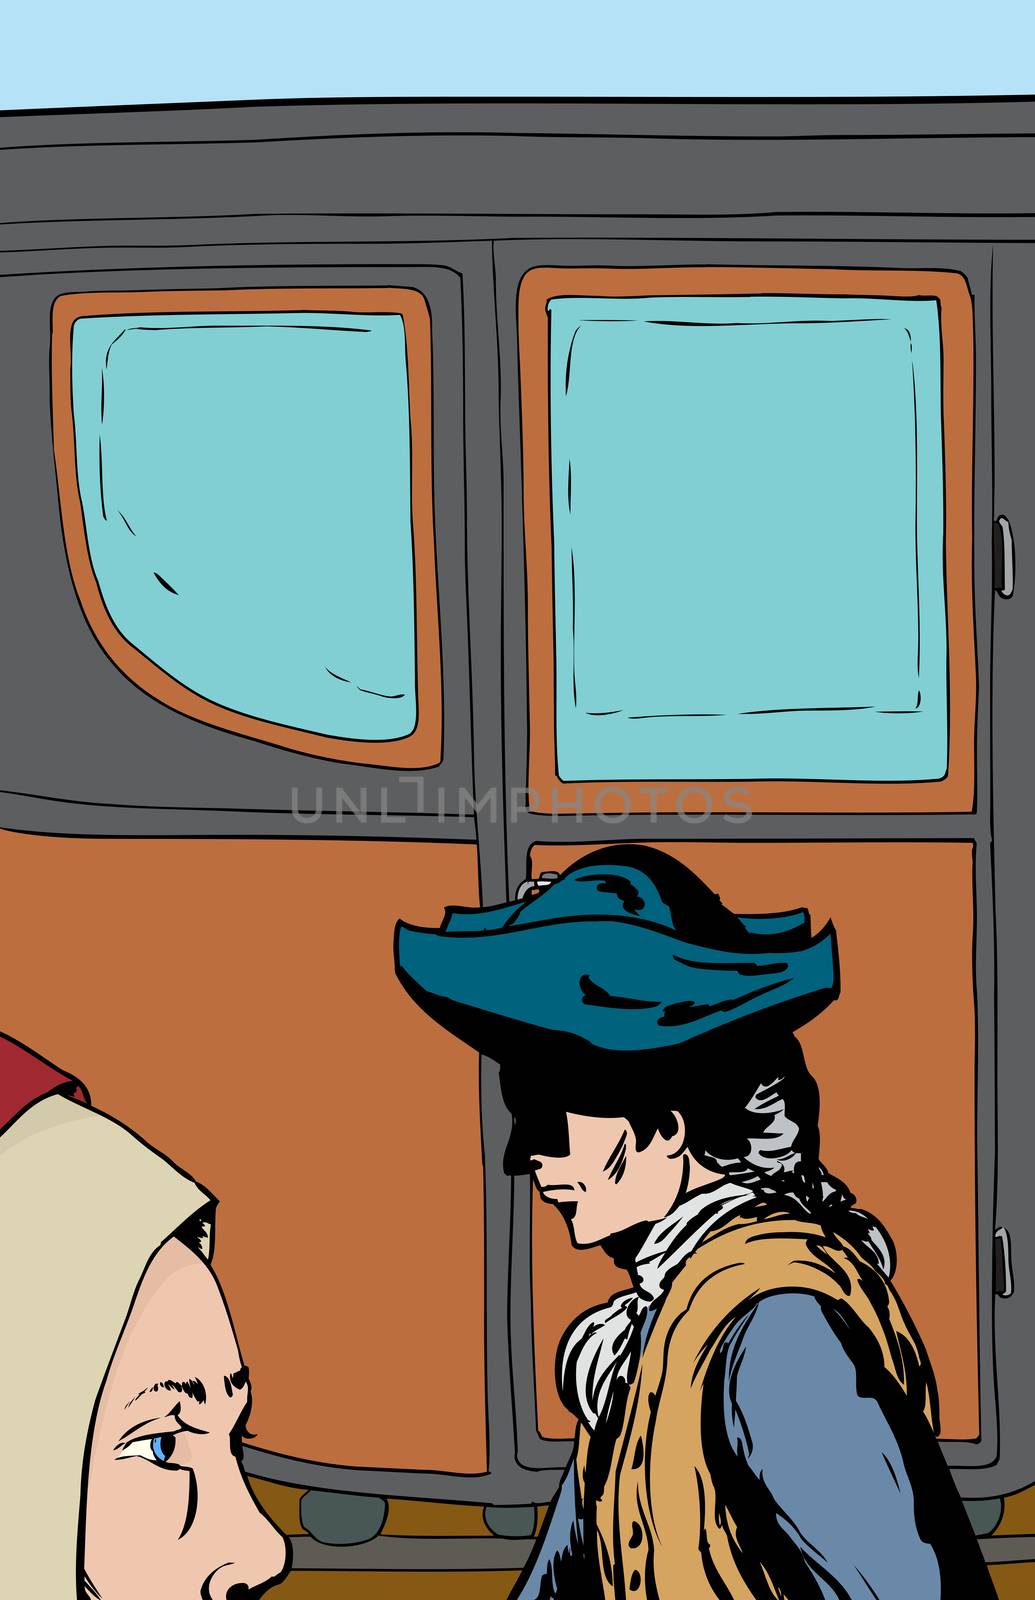 Man and woman walking past empty 18th century style carriage